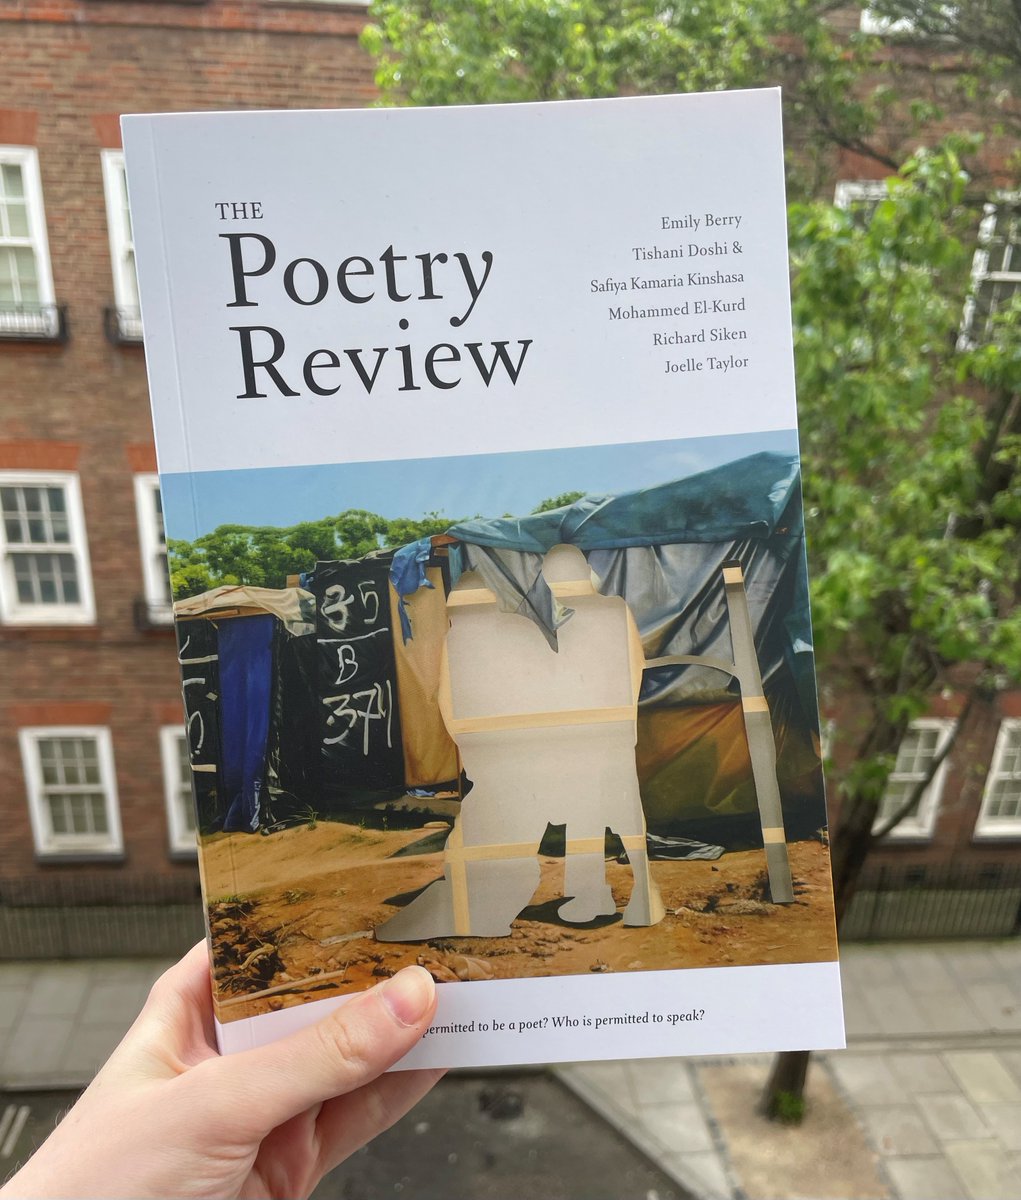 A selection of poems and reviews from this splendid spring issue of #ThePoetryReview are now available to read online!